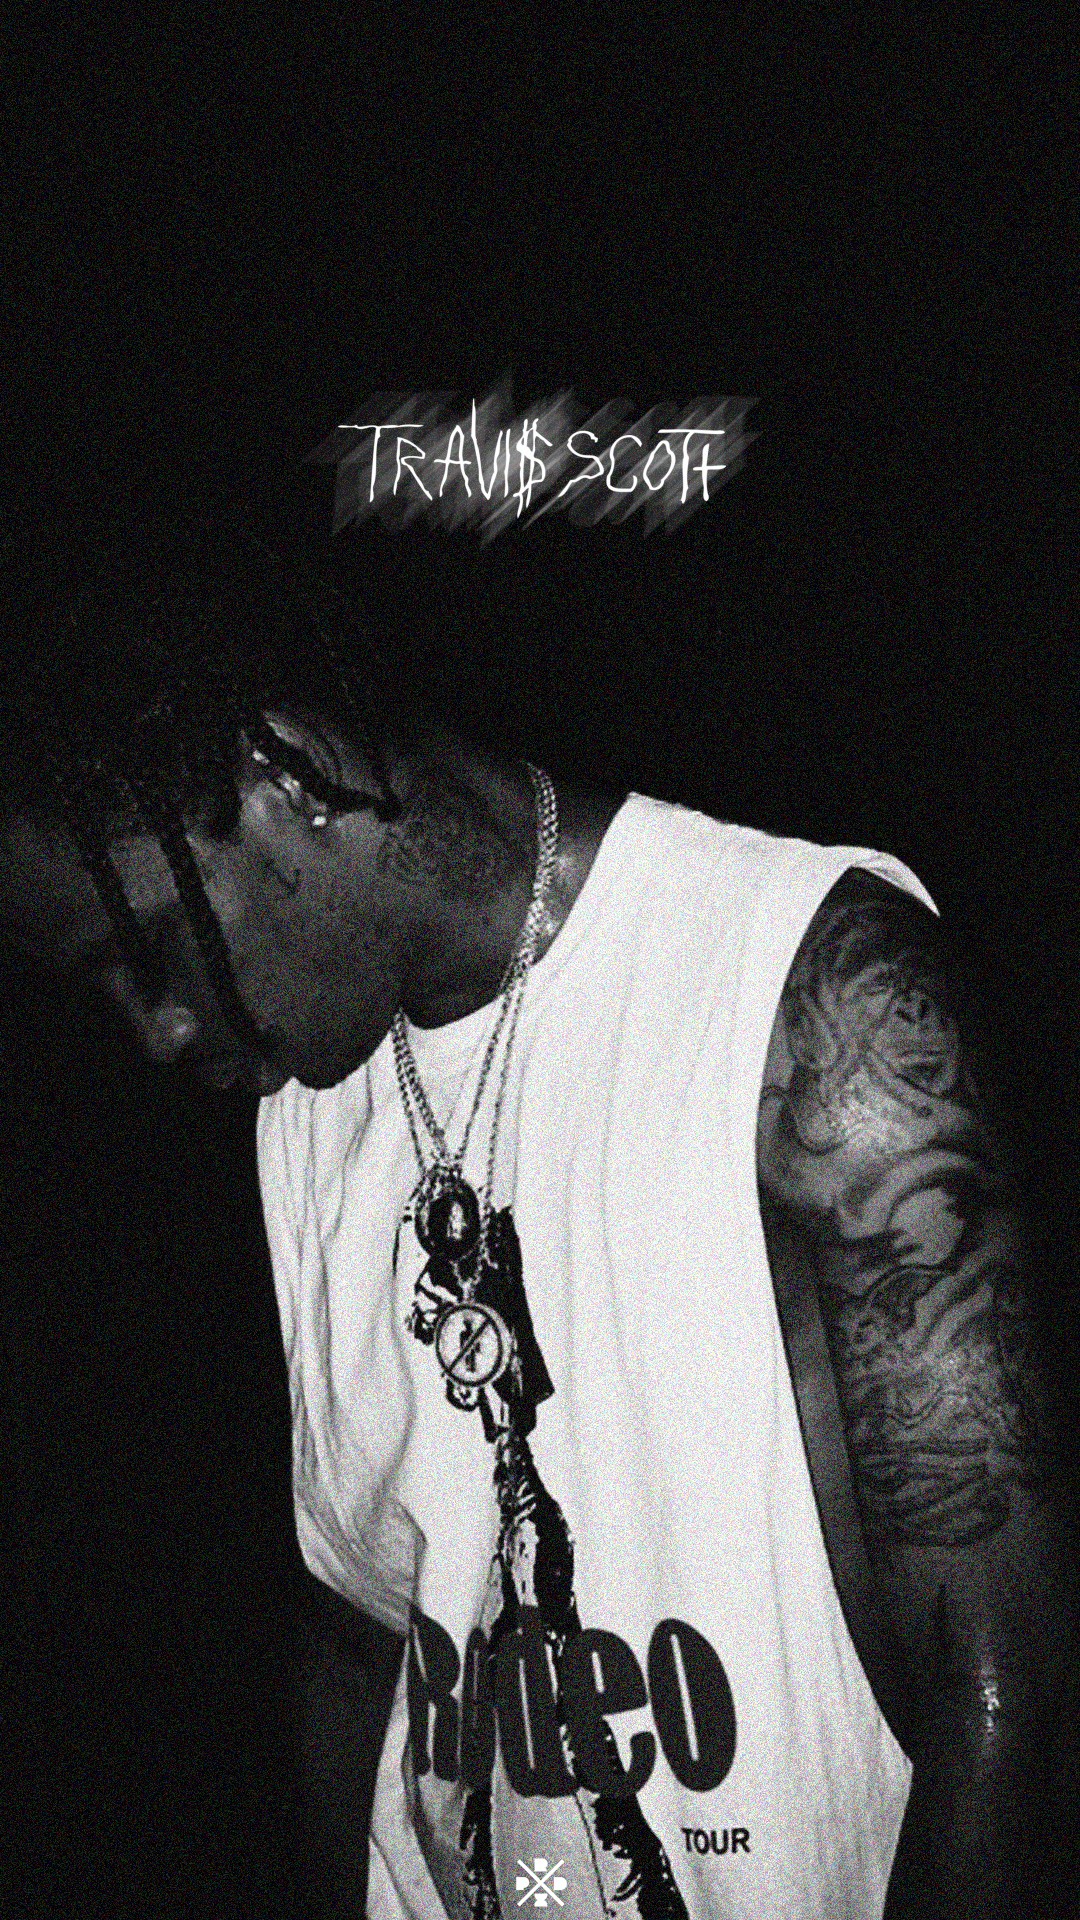 Travis Scott wallpaper ·① Download free amazing HD wallpapers for desktop and mobile devices in ...